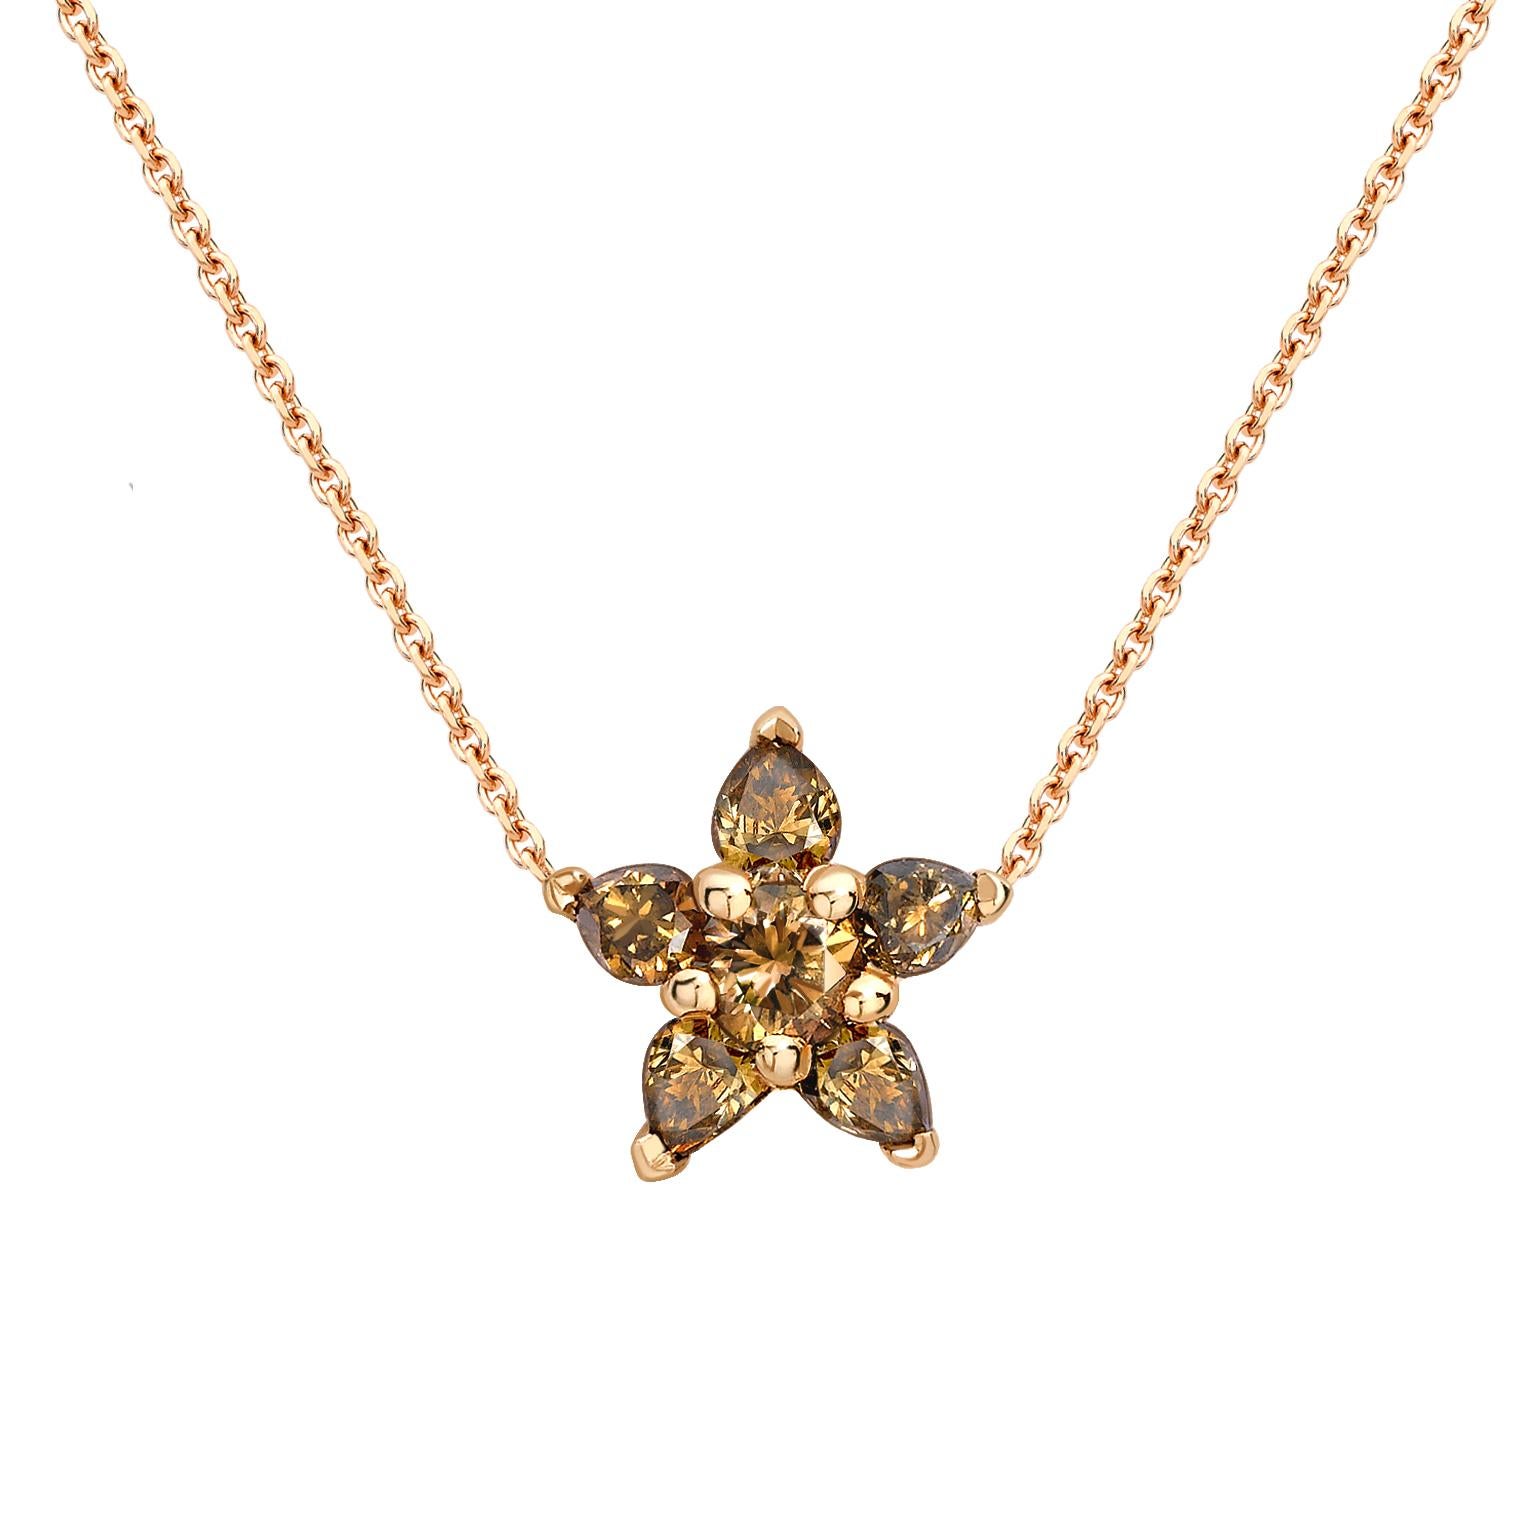 This beautiful set works well worn together or individually and offers versatility. 

This delicate pendant is handcrafted from 18ct rose gold and set with natural cognac diamonds which total 0.45ct. It an elegant piece dressed up or down and is the